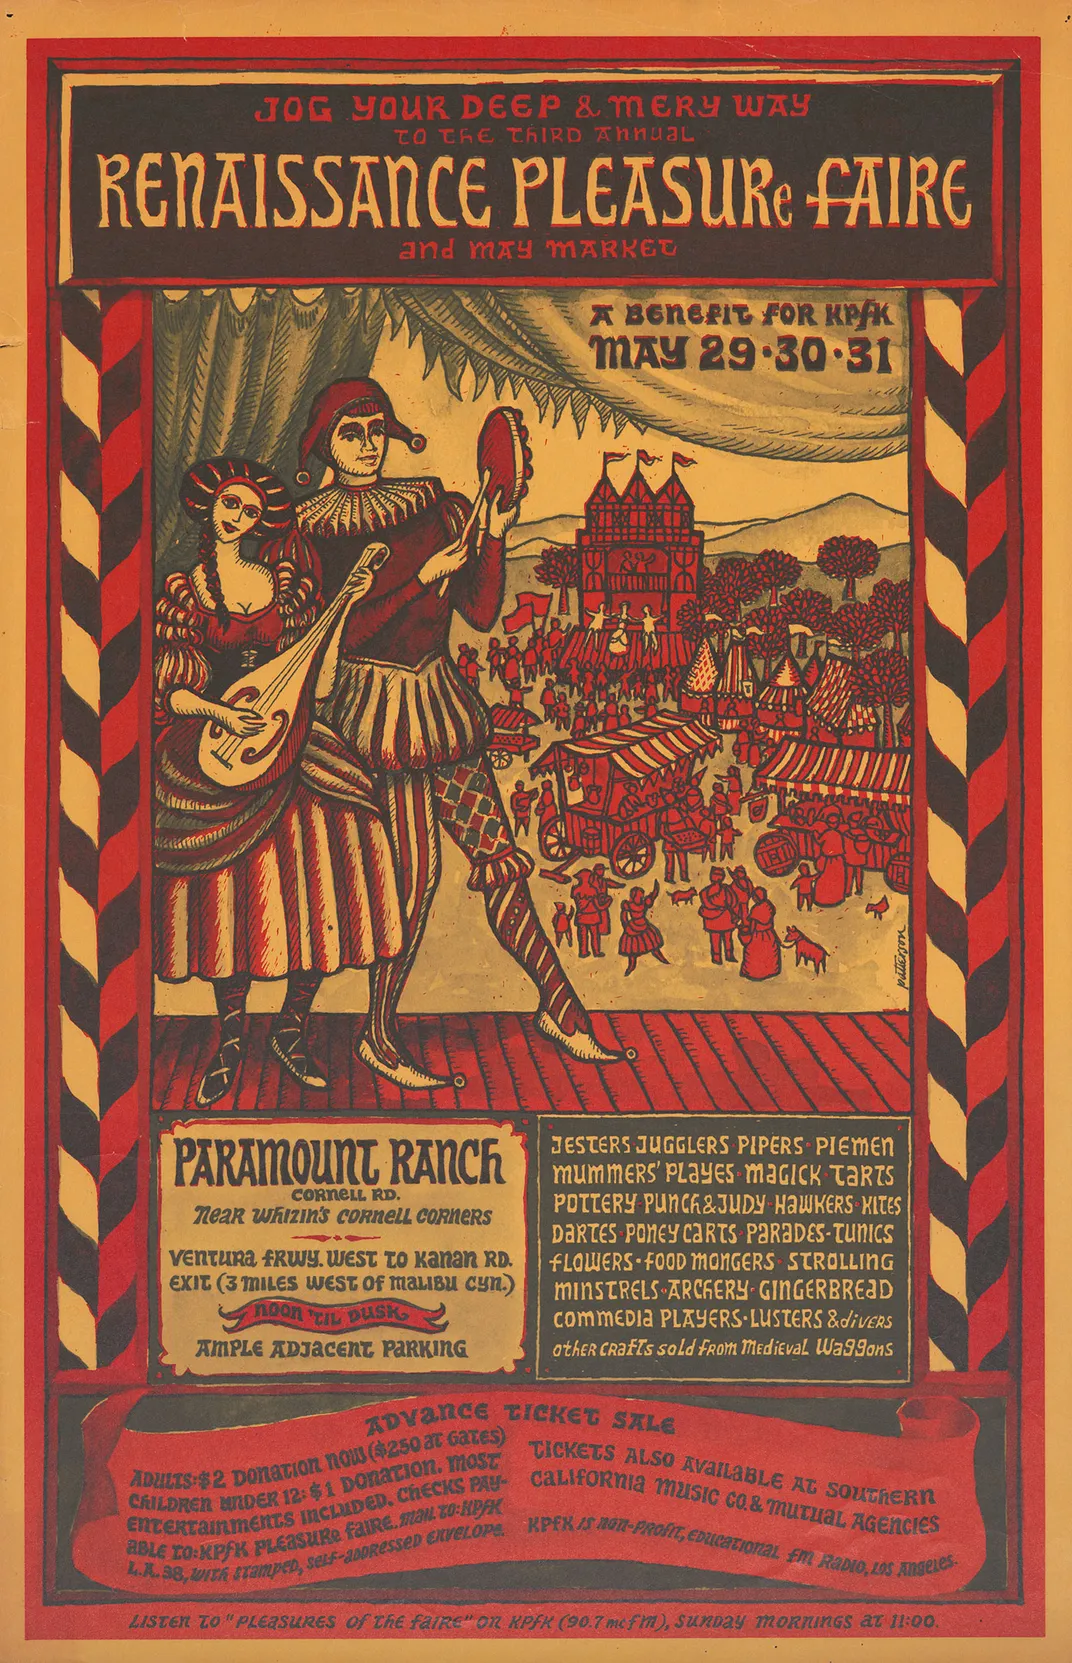 A hand-drawn poster for the fair by Ron Patterson